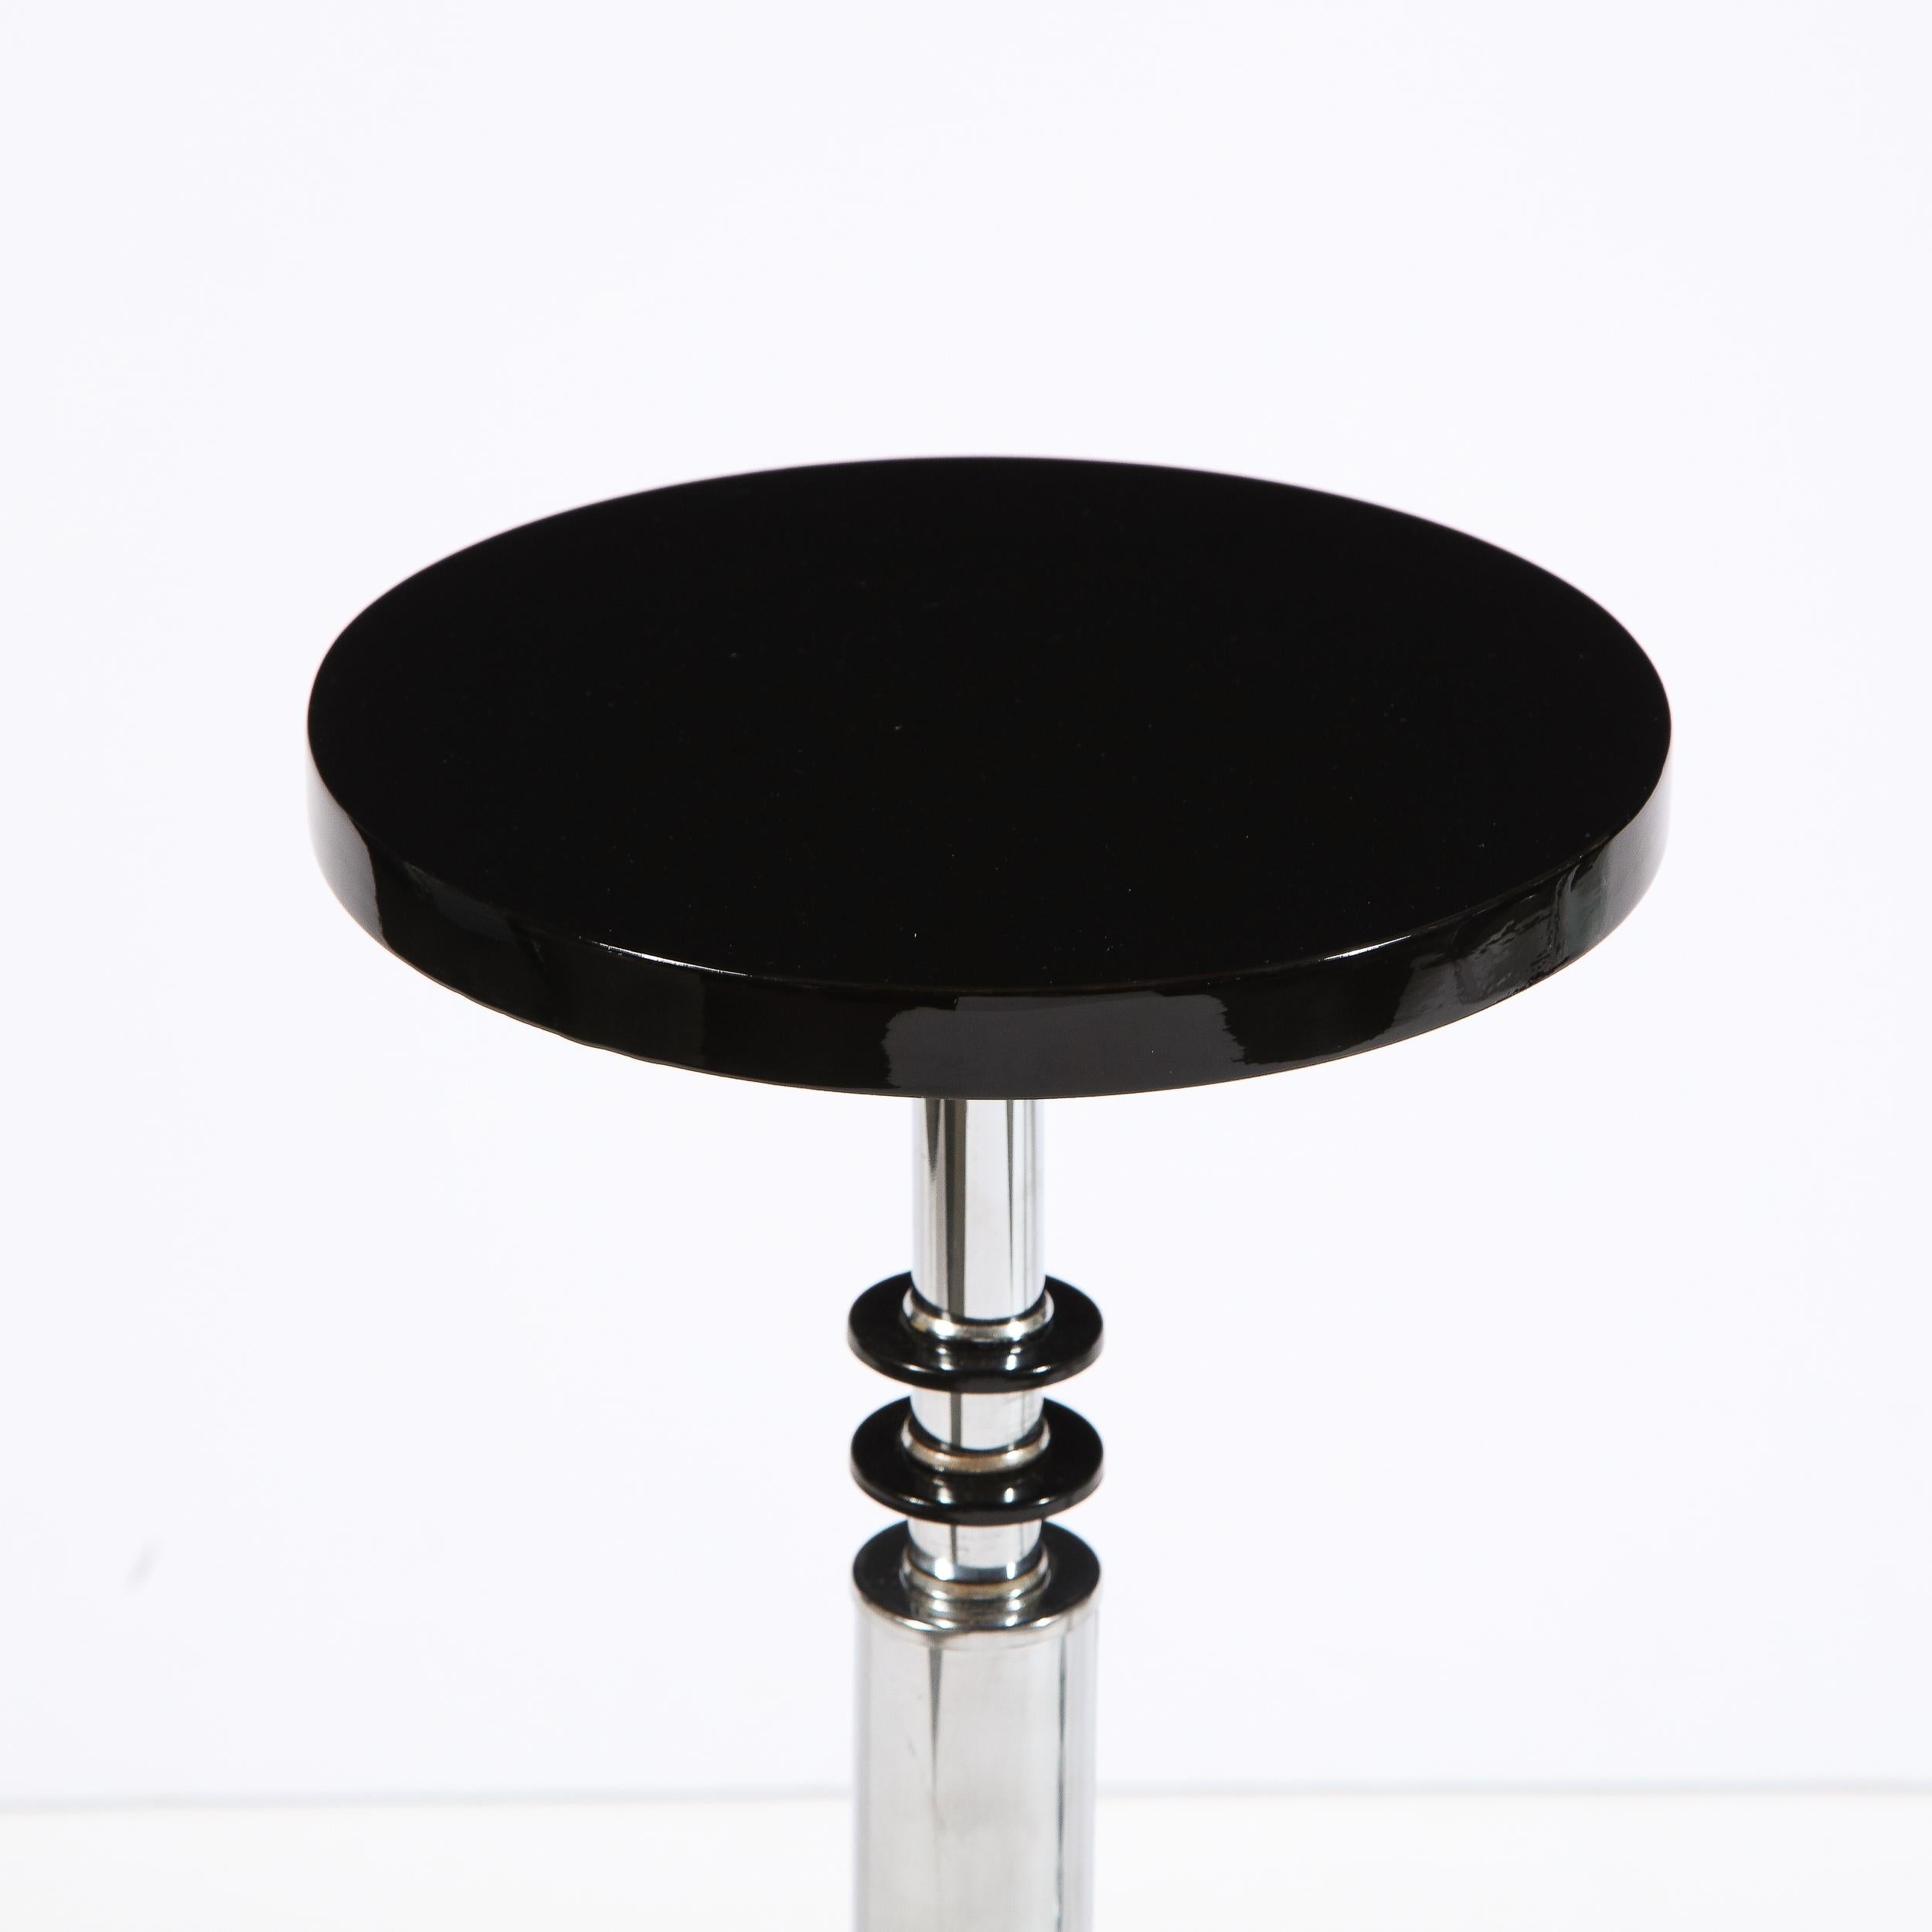 This stunning Art Deco Machine Age drinks table was realized in the United States, circa 1935. It features a circular black lacquer top, chrome body and skyscraper style black lacquer and chrome base. Additionally, circular banding detailing in